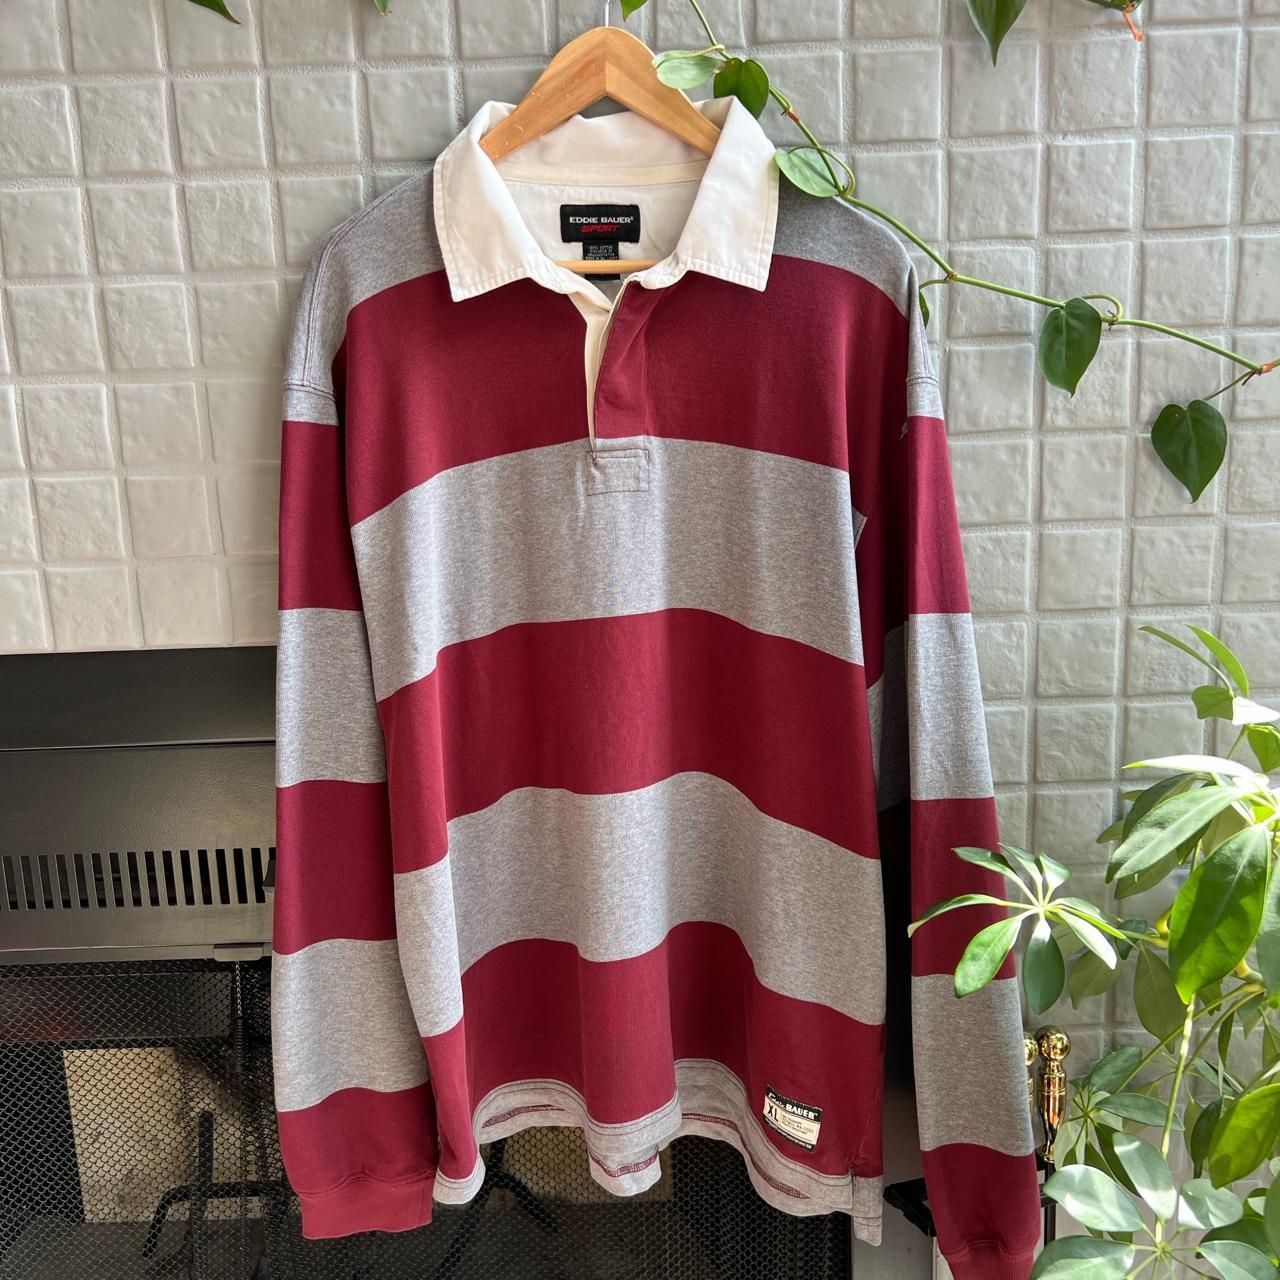 Vintage 90s Polo Sport rugby long sleeve polo - Depop